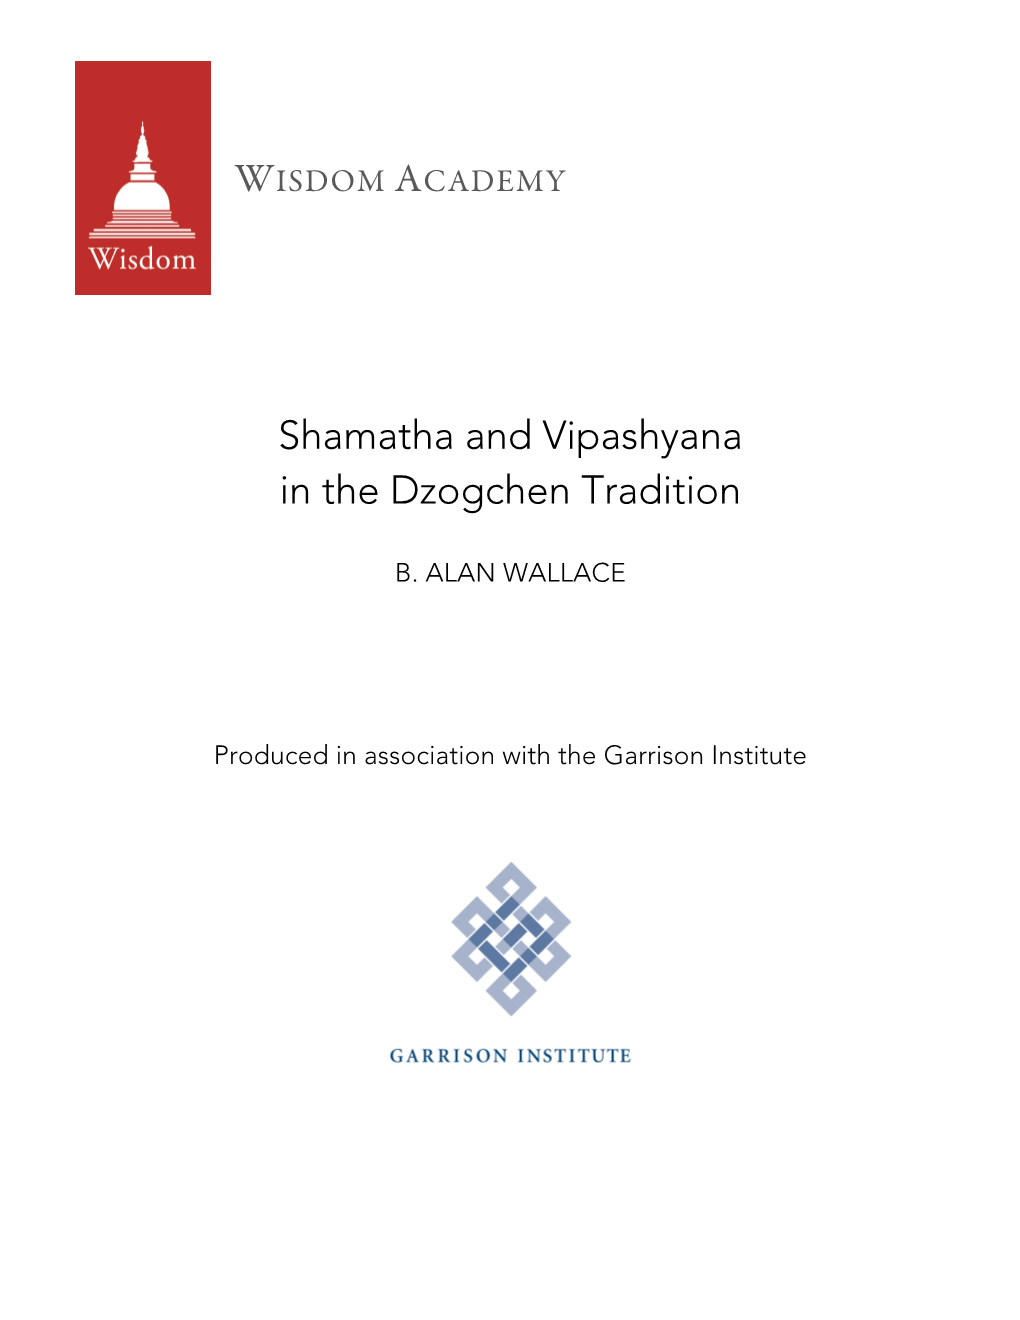 Shamatha and Vipashyana in the Dzogchen Tradition